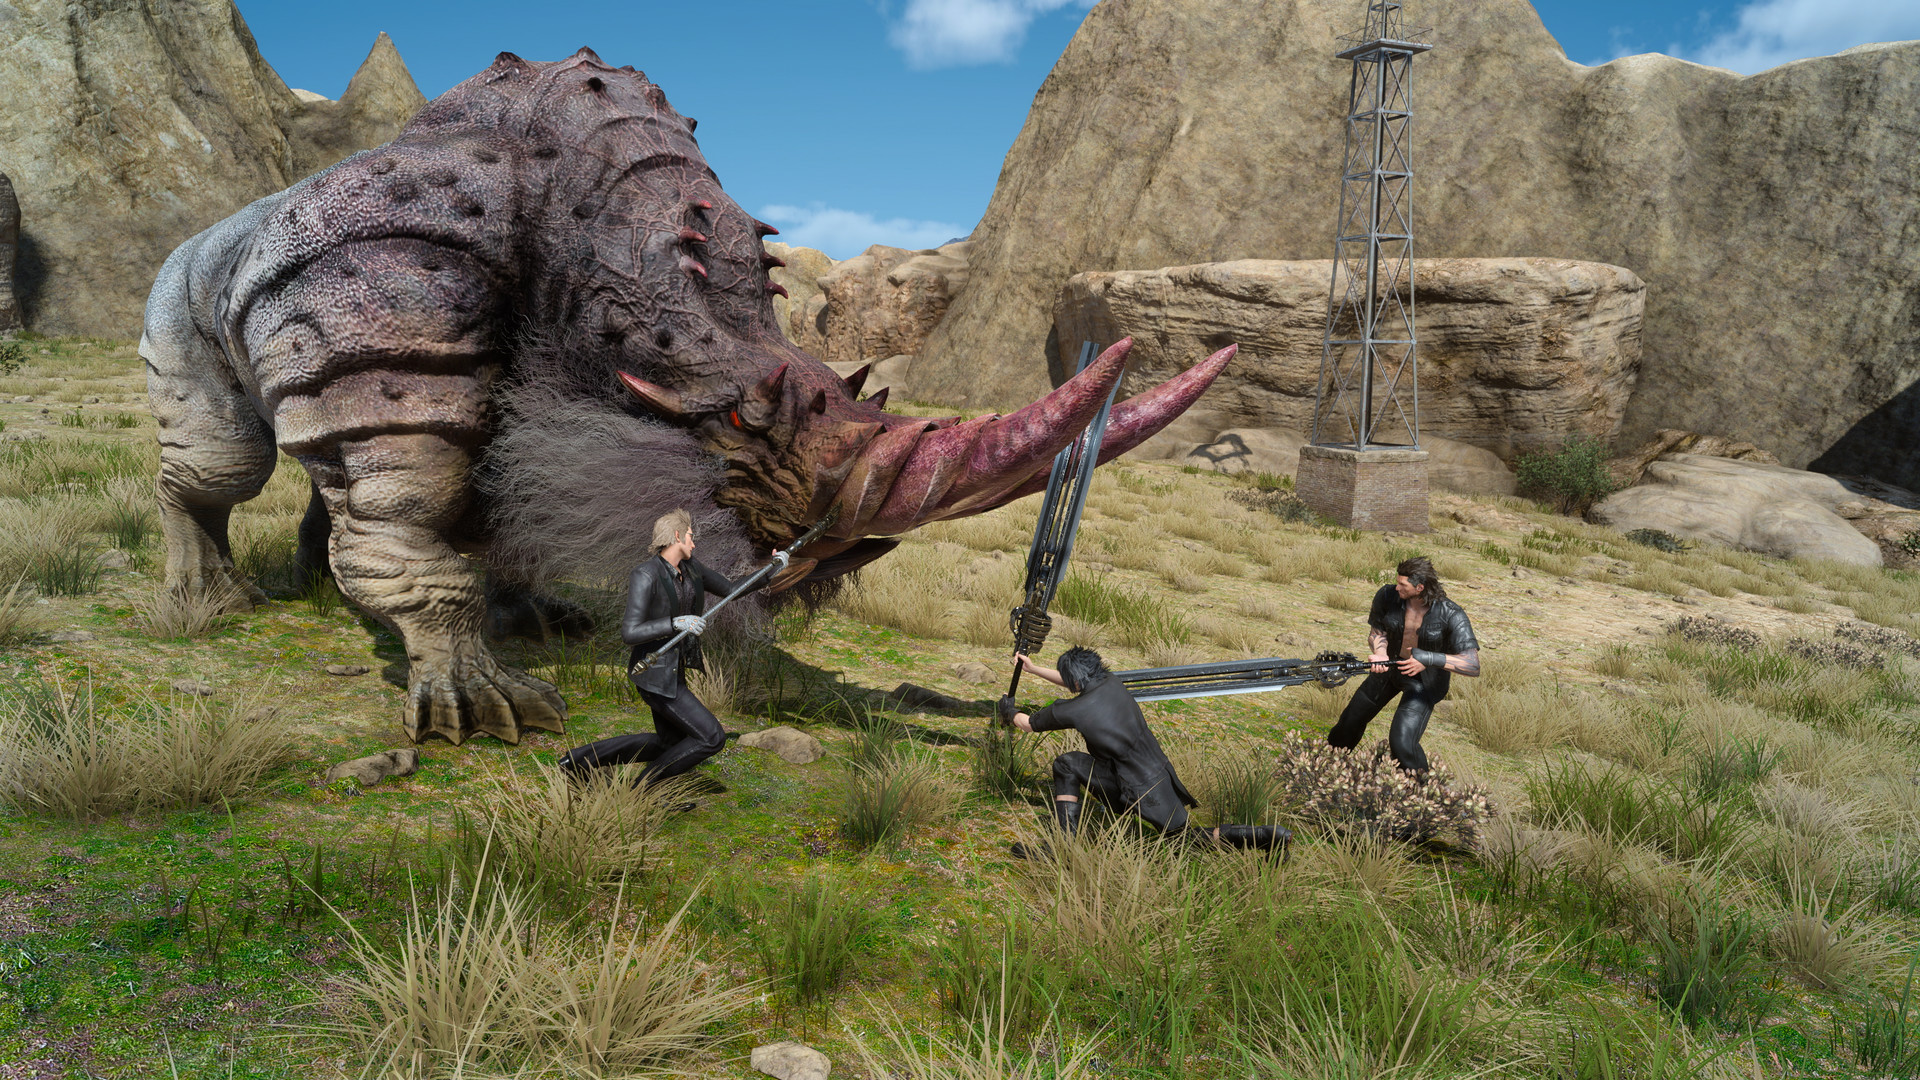 download the new version for ios FINAL FANTASY XV WINDOWS EDITION Playable Demo